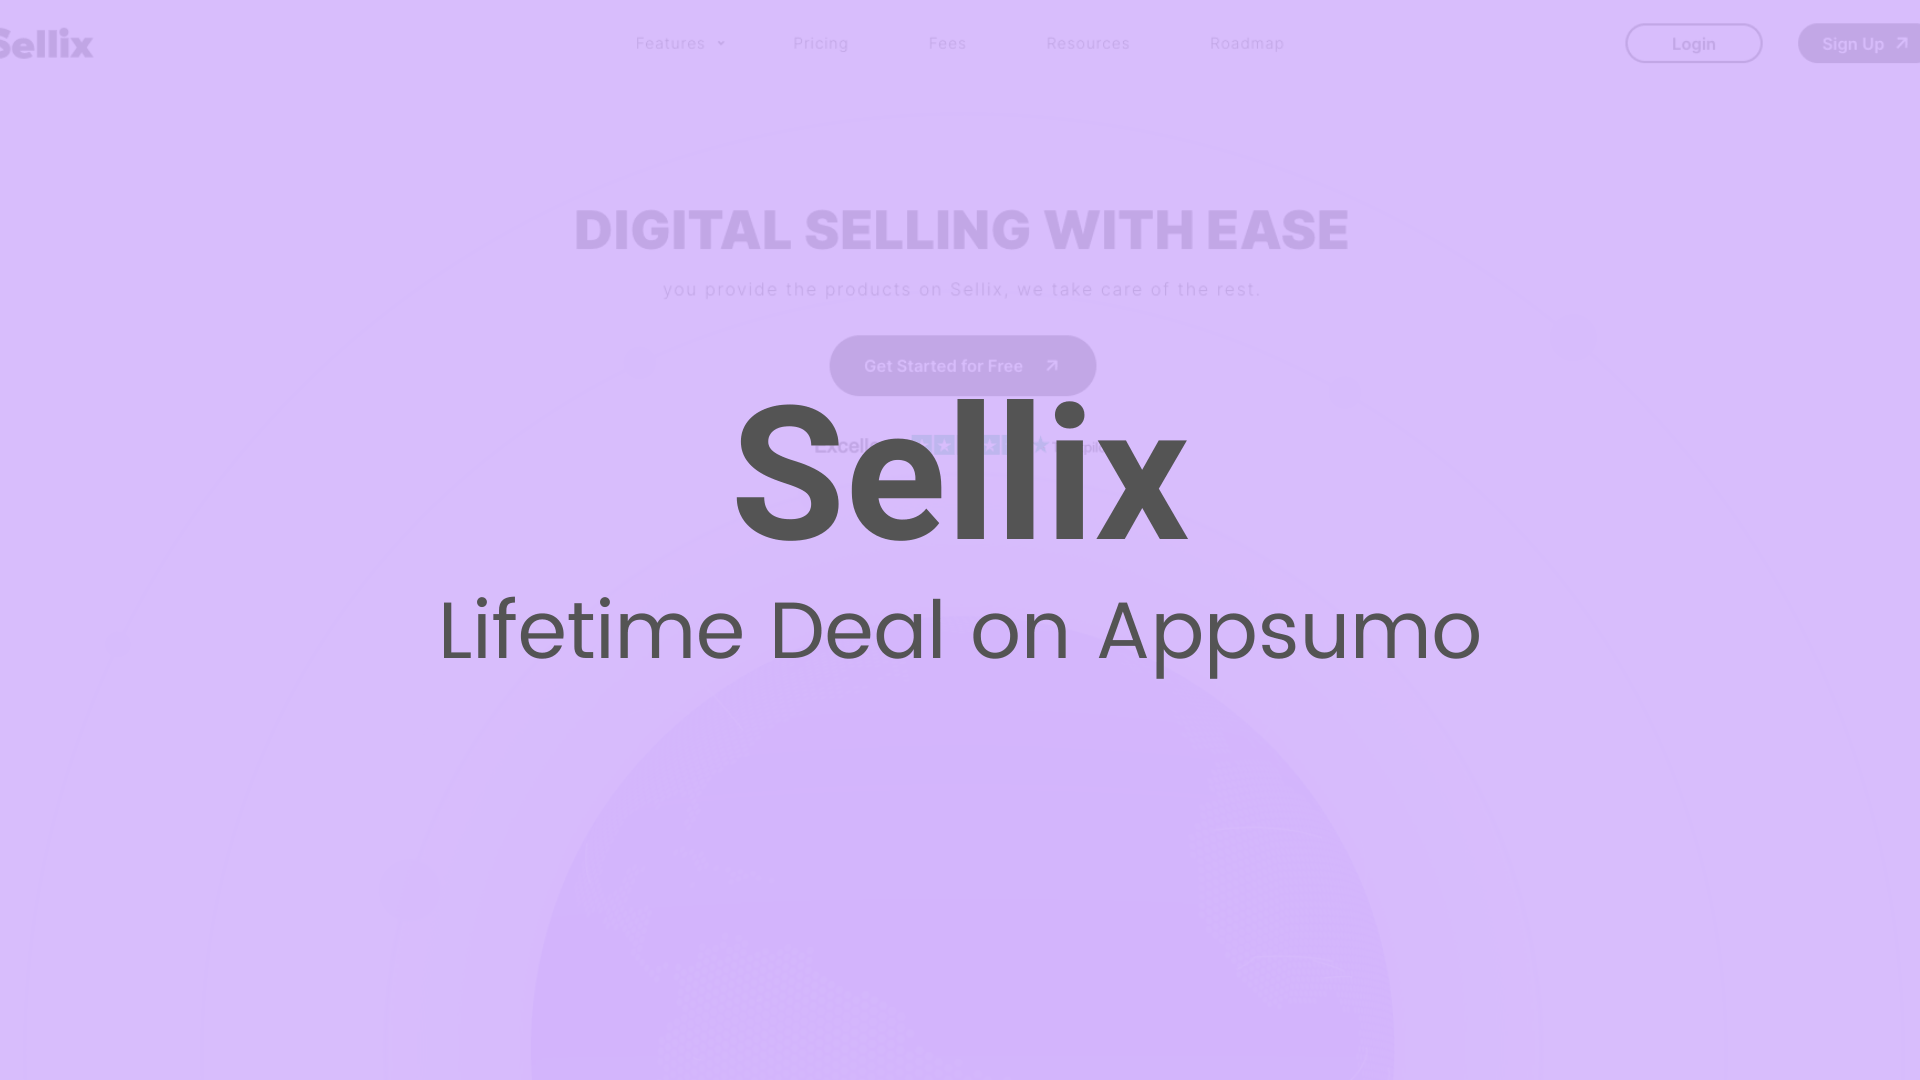 Sellix: An Ecommerce Platform Where You Can Sell Digital Products and Services